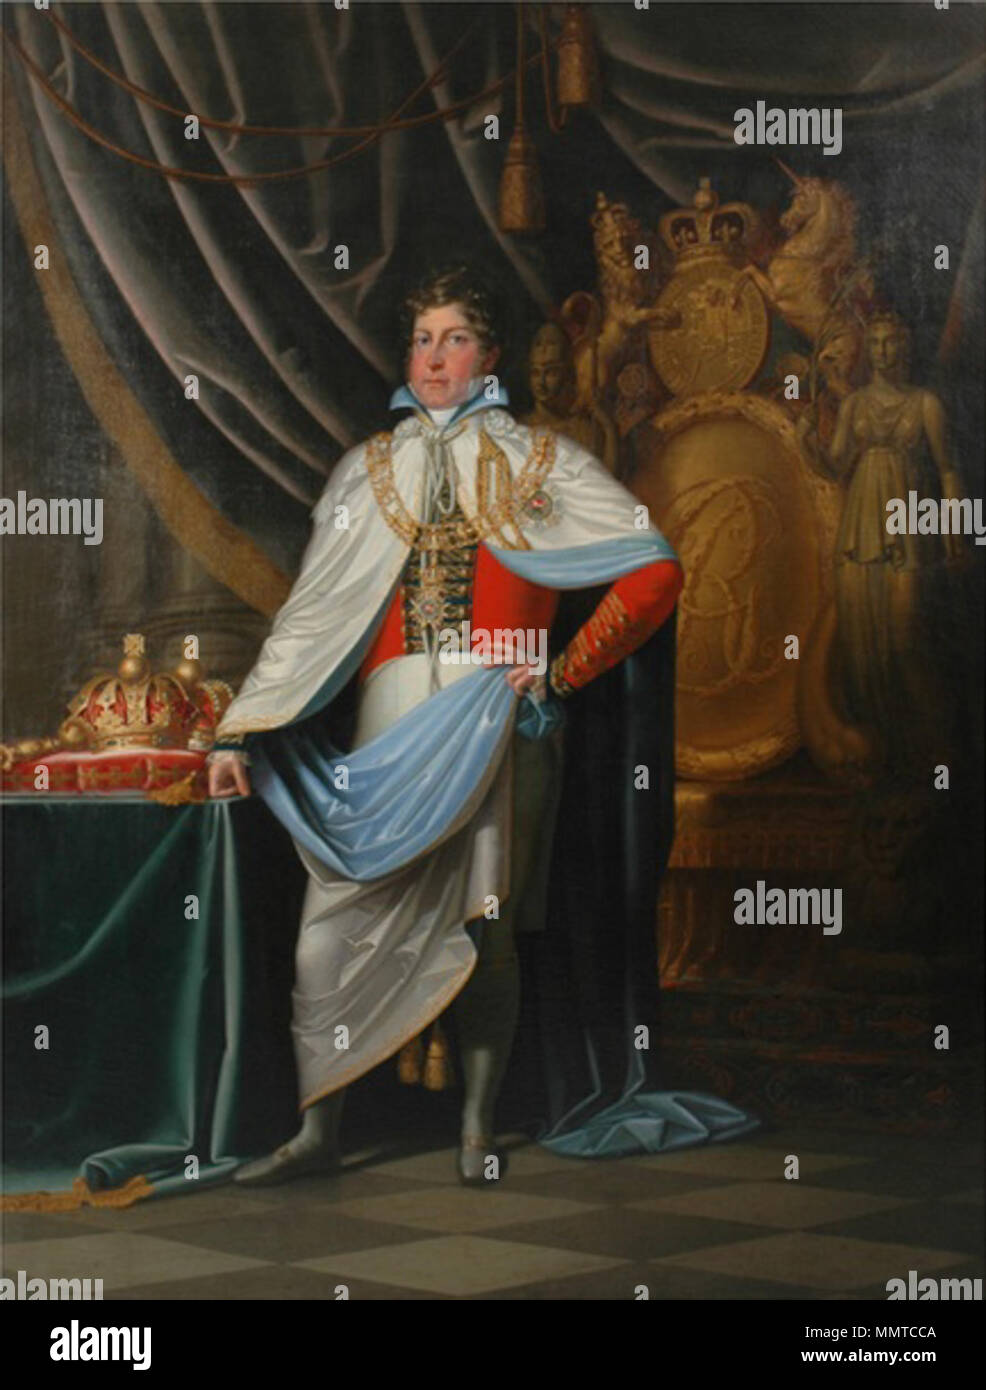 English: Portrait of George IV as Grand Cross Knight of Hanoverian Guelphic Order . circa 1815. George IV as Knight of Hanoverian Guelphic Order Stock Photo